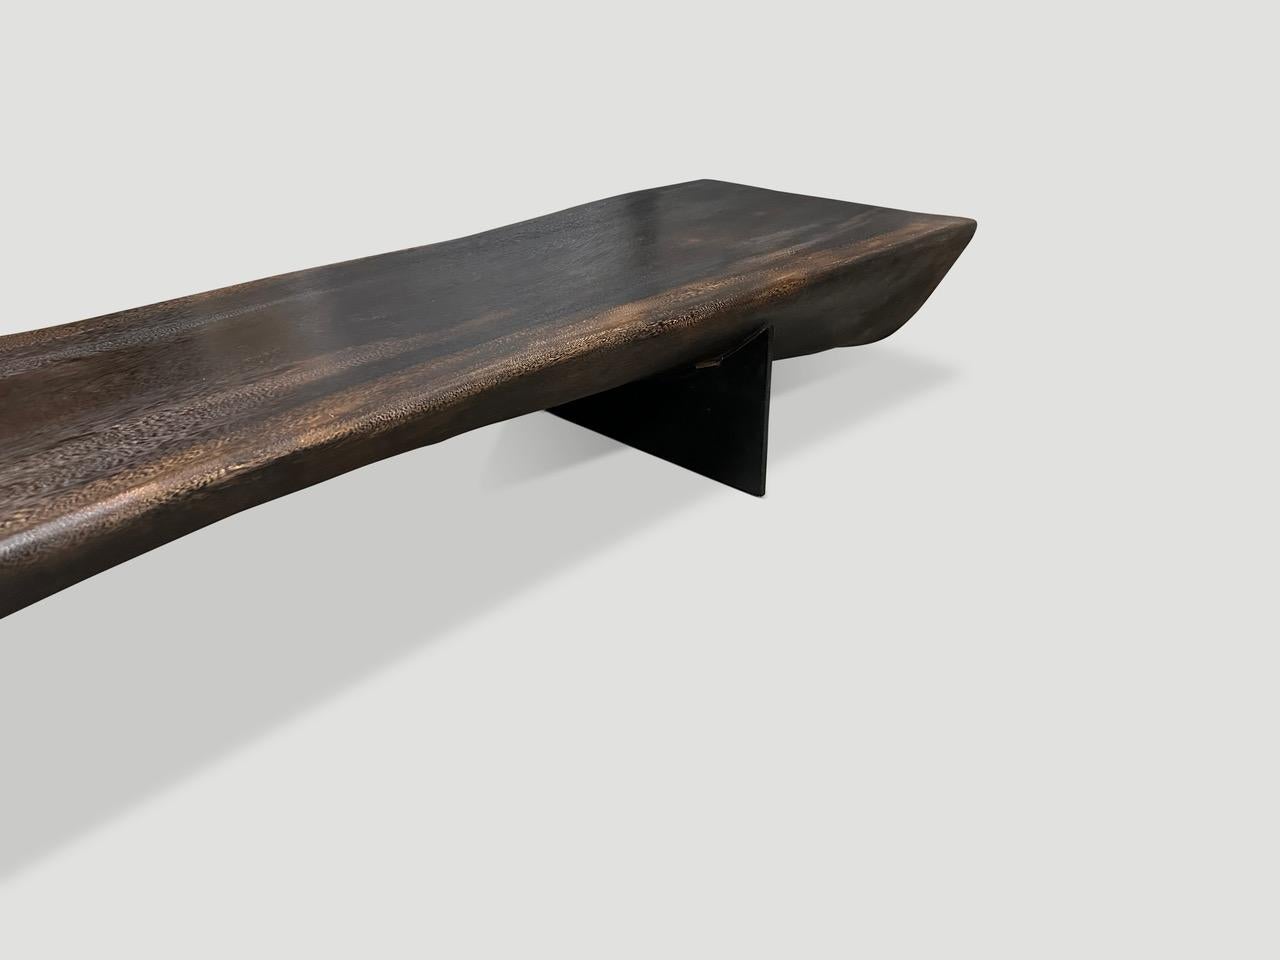 Andrianna Shamaris Impressive Long Suar Wood Charred Bench In Excellent Condition For Sale In New York, NY